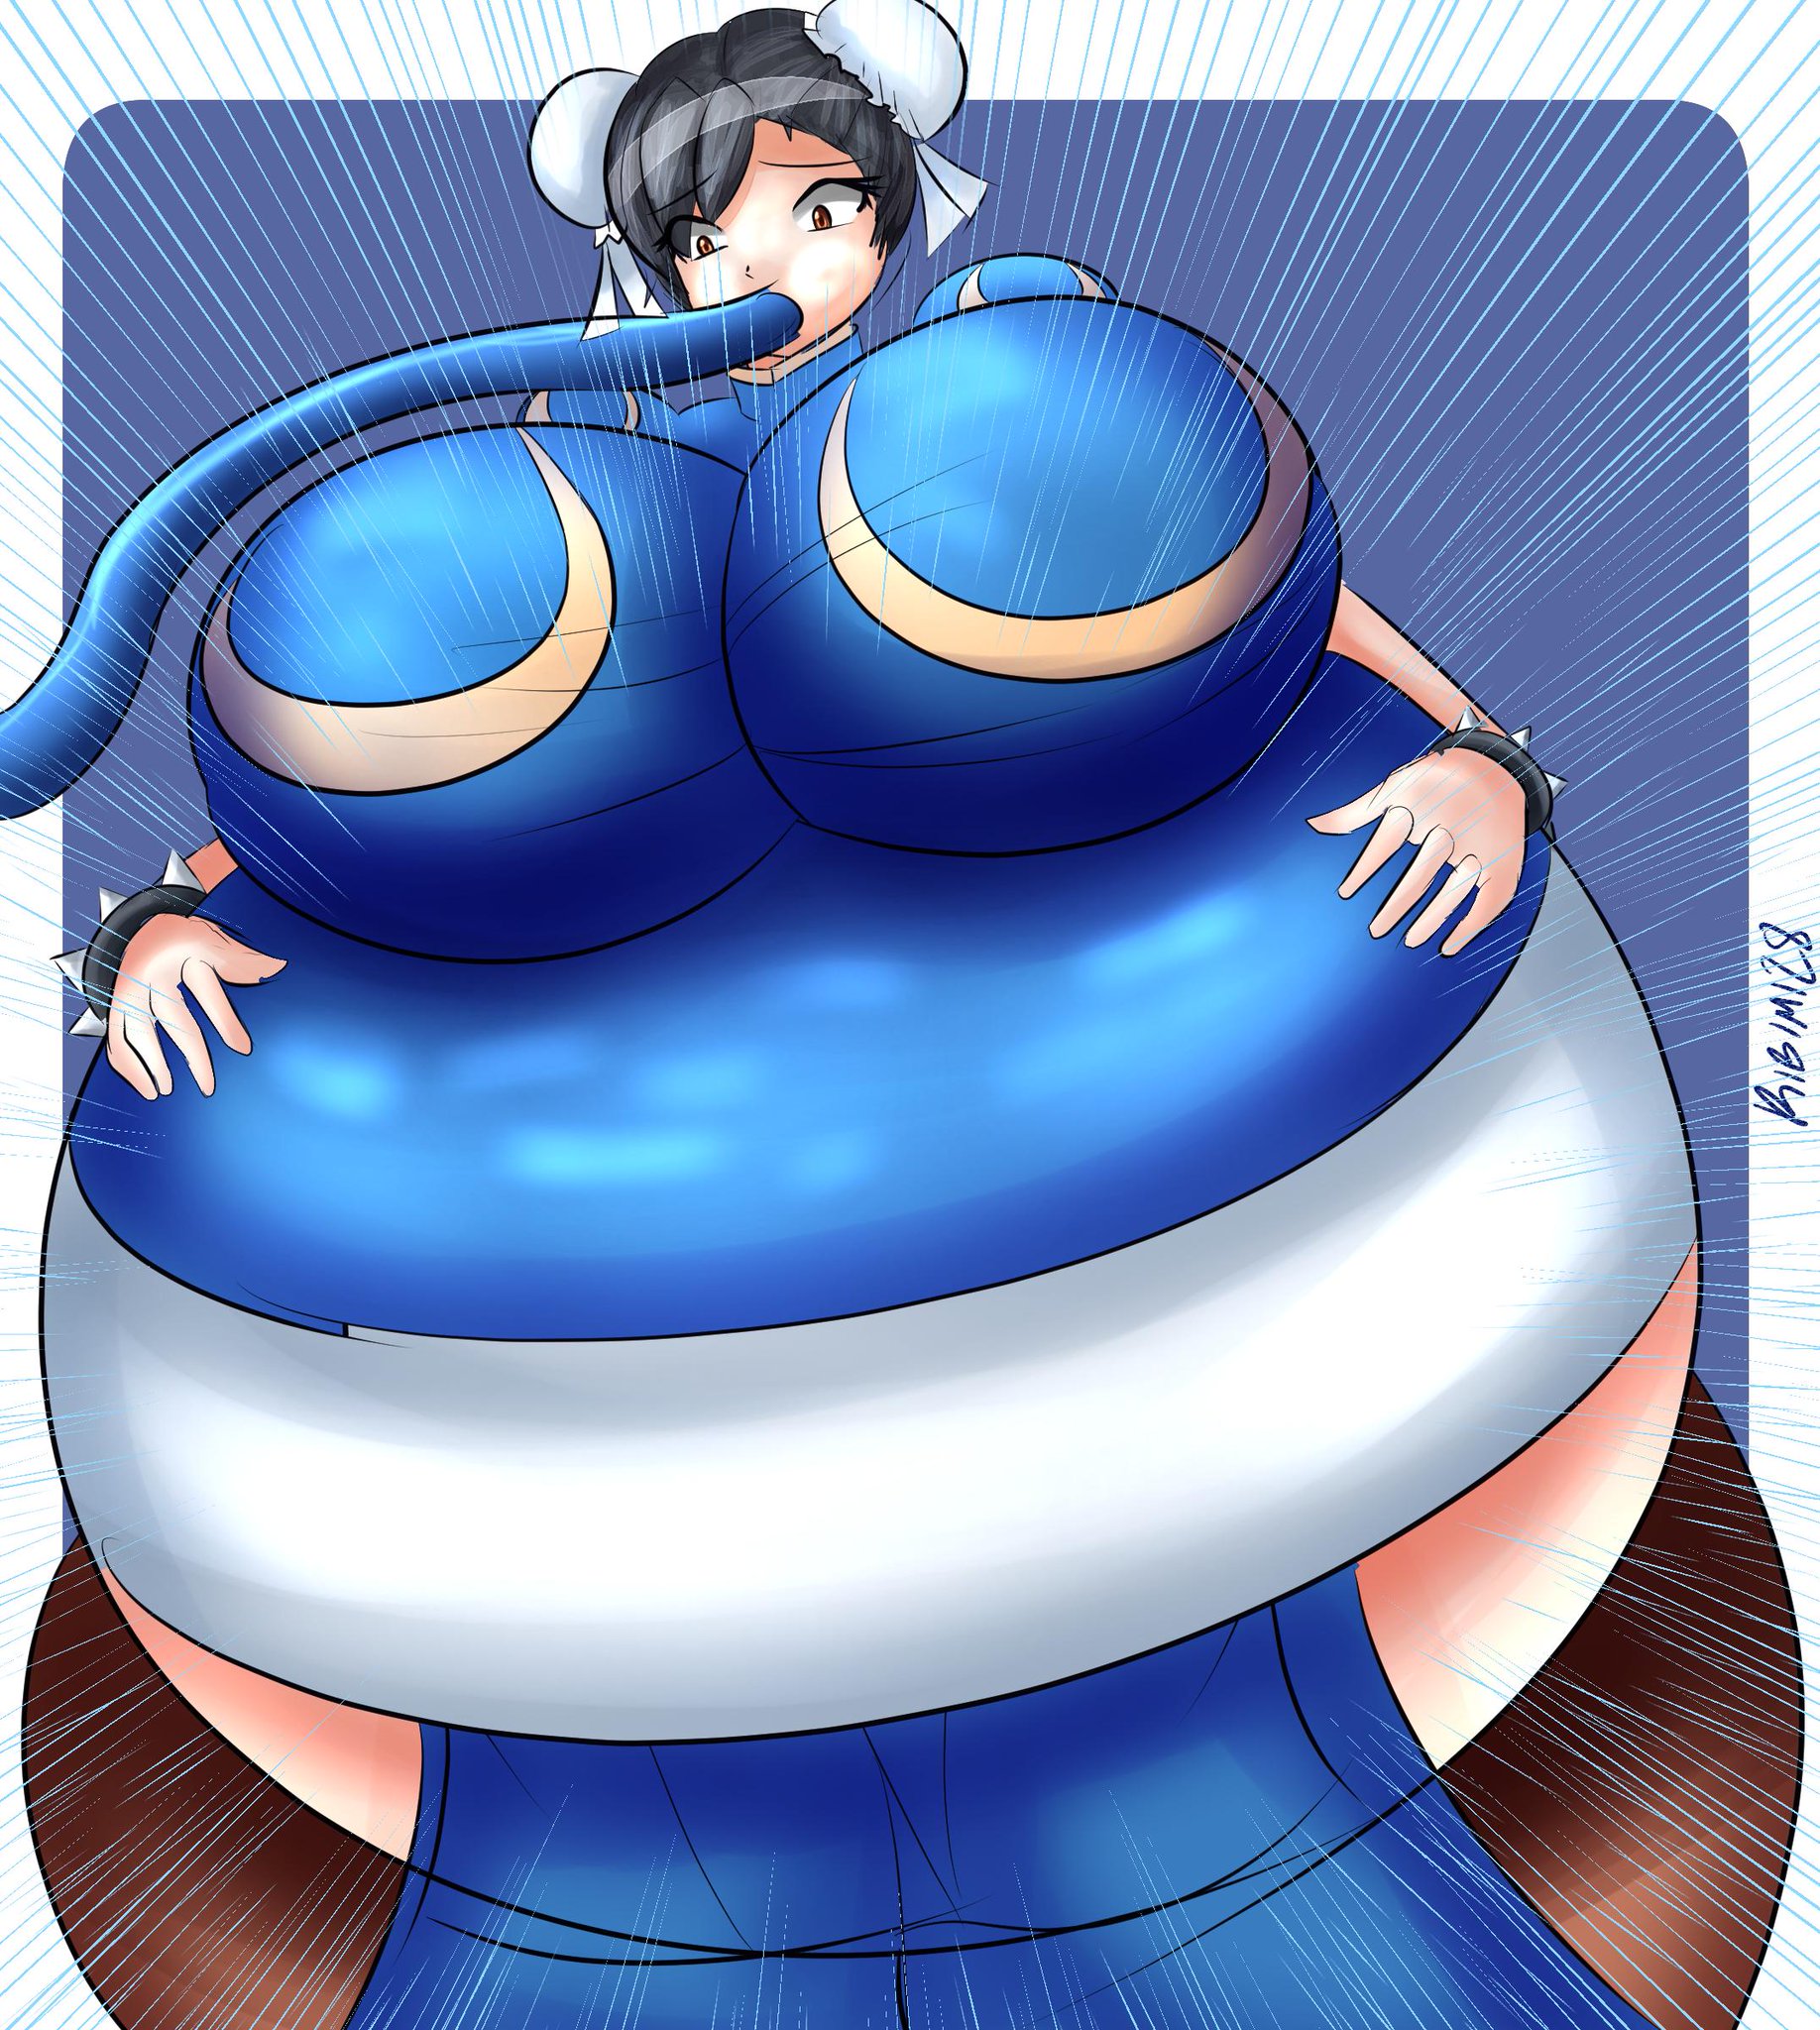 “Commission for @RandomDudeGamer who requested for water inflation of Chun-...